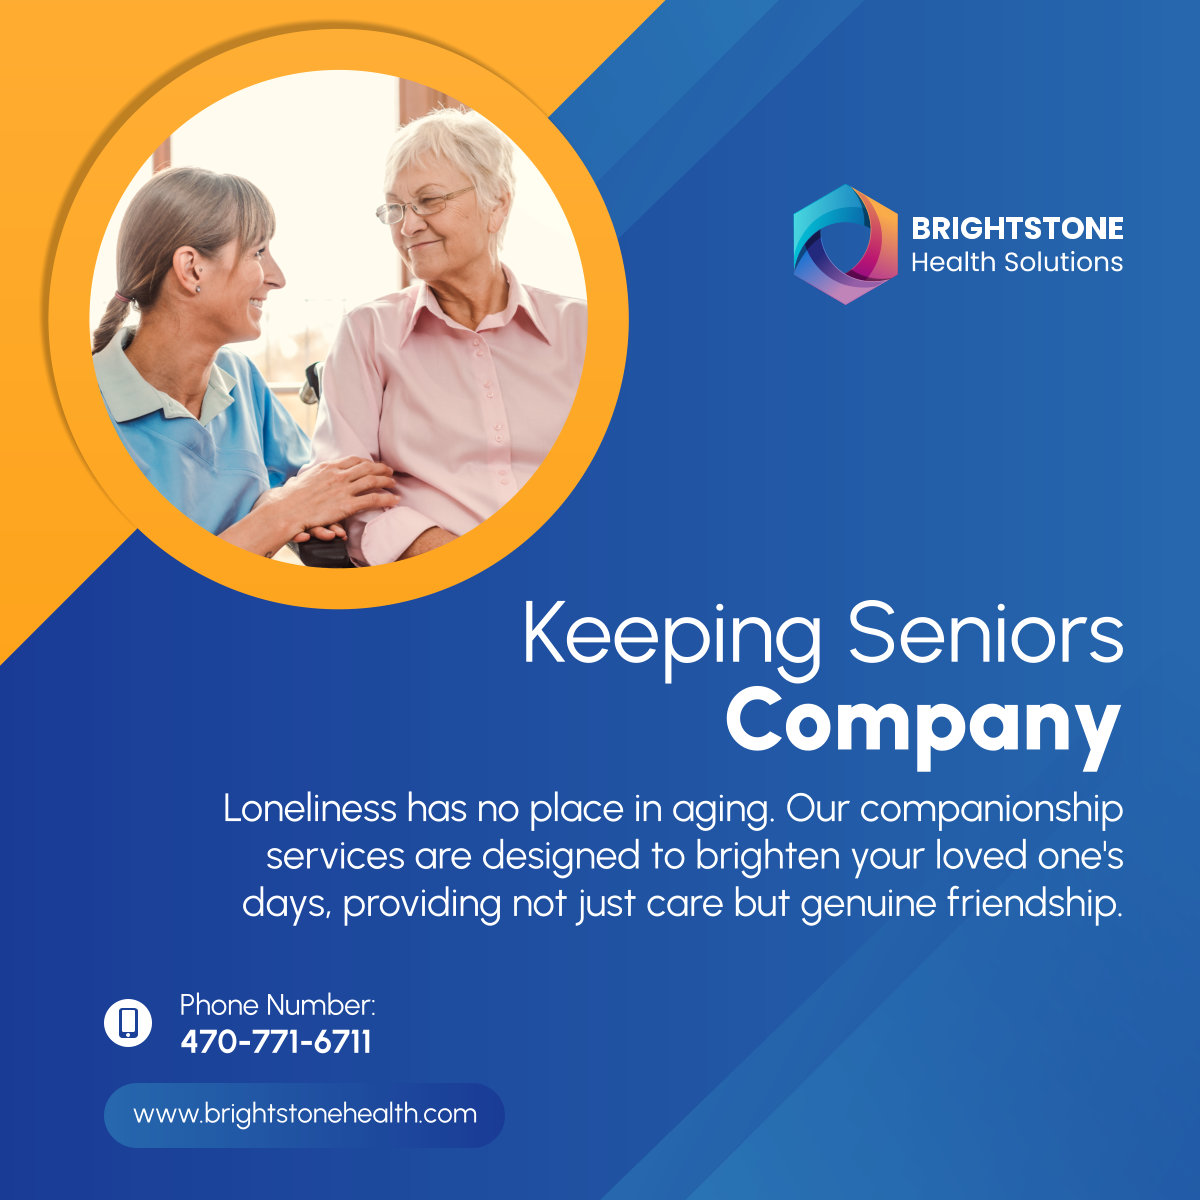 Beyond care, we offer companionship that warms the heart. Our dedicated team ensures that seniors feel valued, heard, and cherished every day. Visit brightstonehealth.com now. 

#HomeCare #CompanionCare #MeaningfulCompanionship